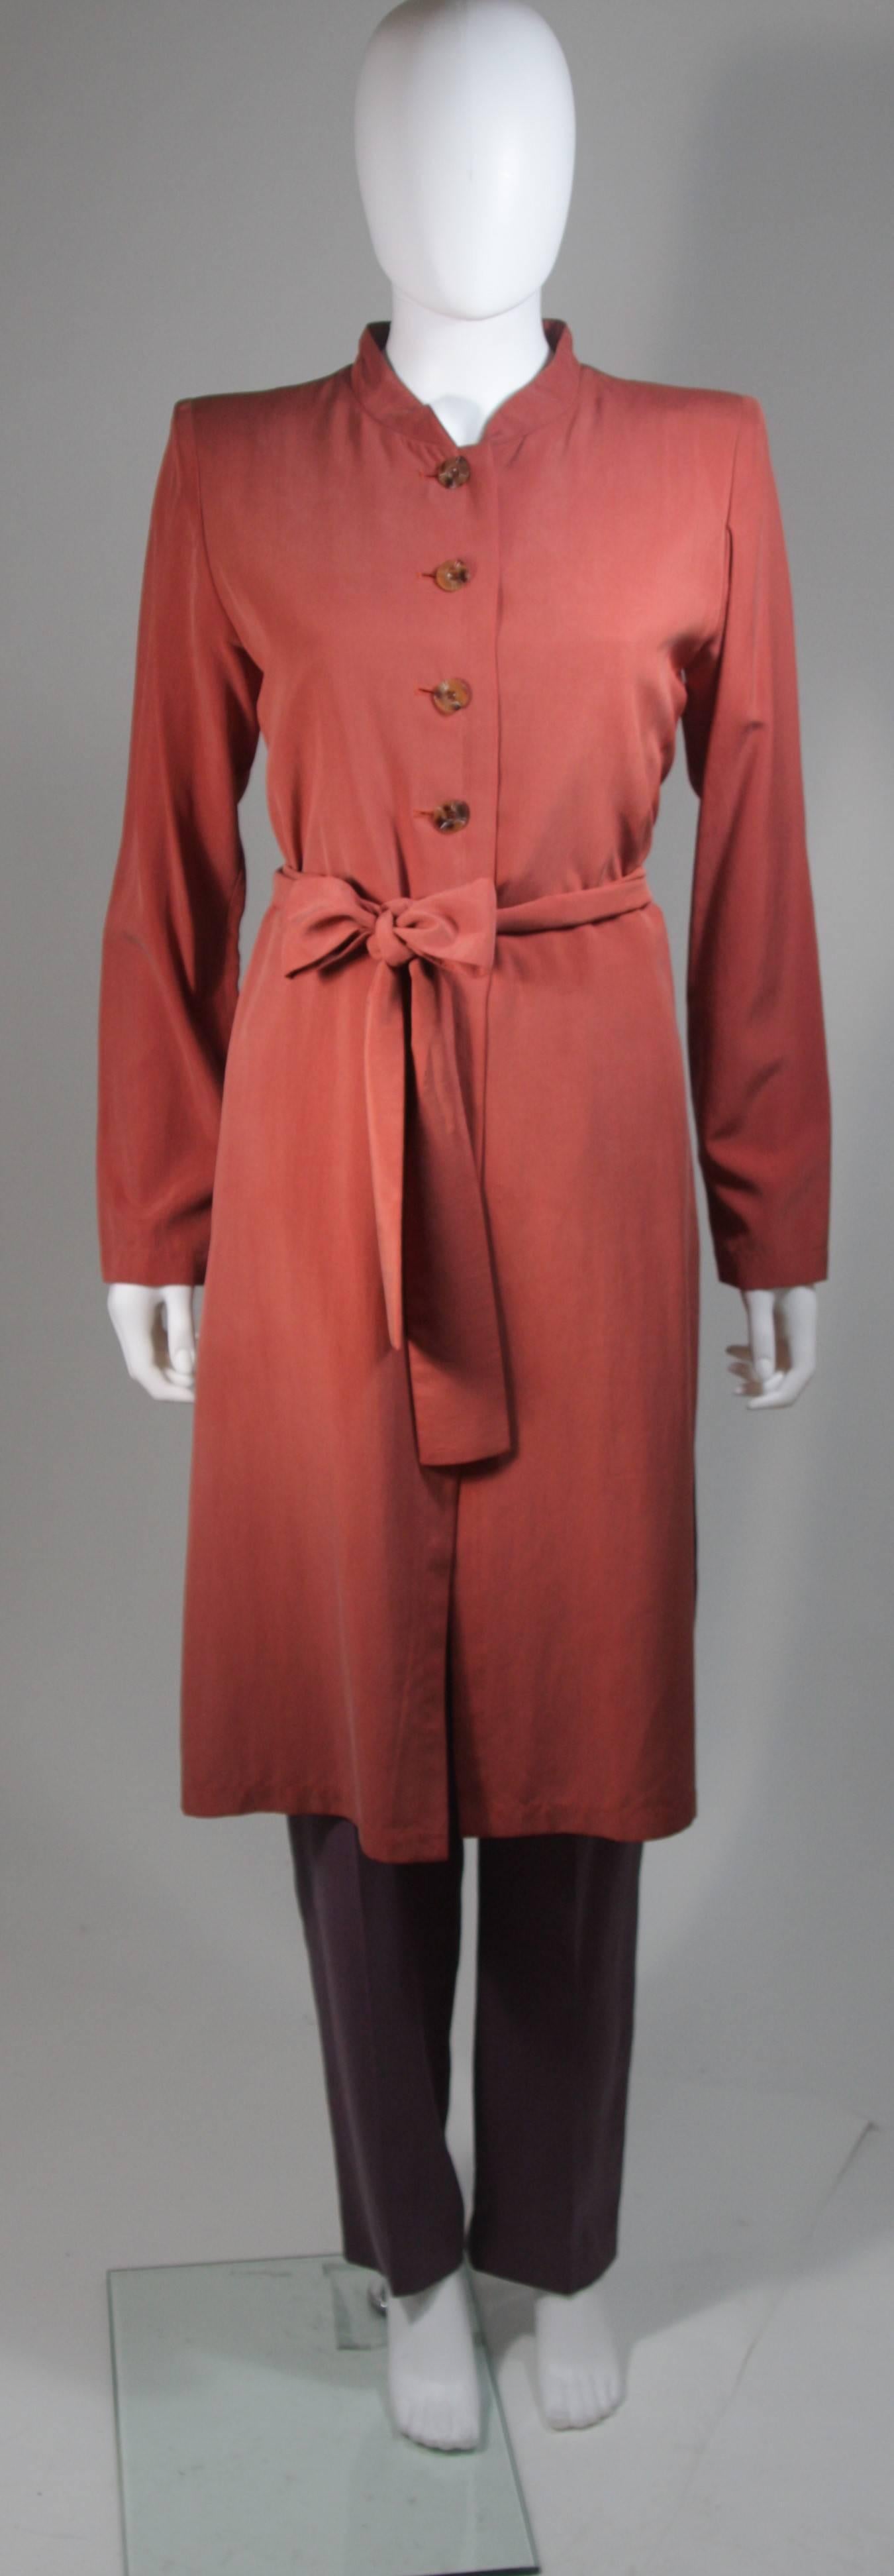  This pant suit is composed of silk. The jacket has a center front closures with side slits. The pants have a classic pleat front silhouette with side zipper closure. In excellent vintage condition. Made in France. 

  **Please cross-reference